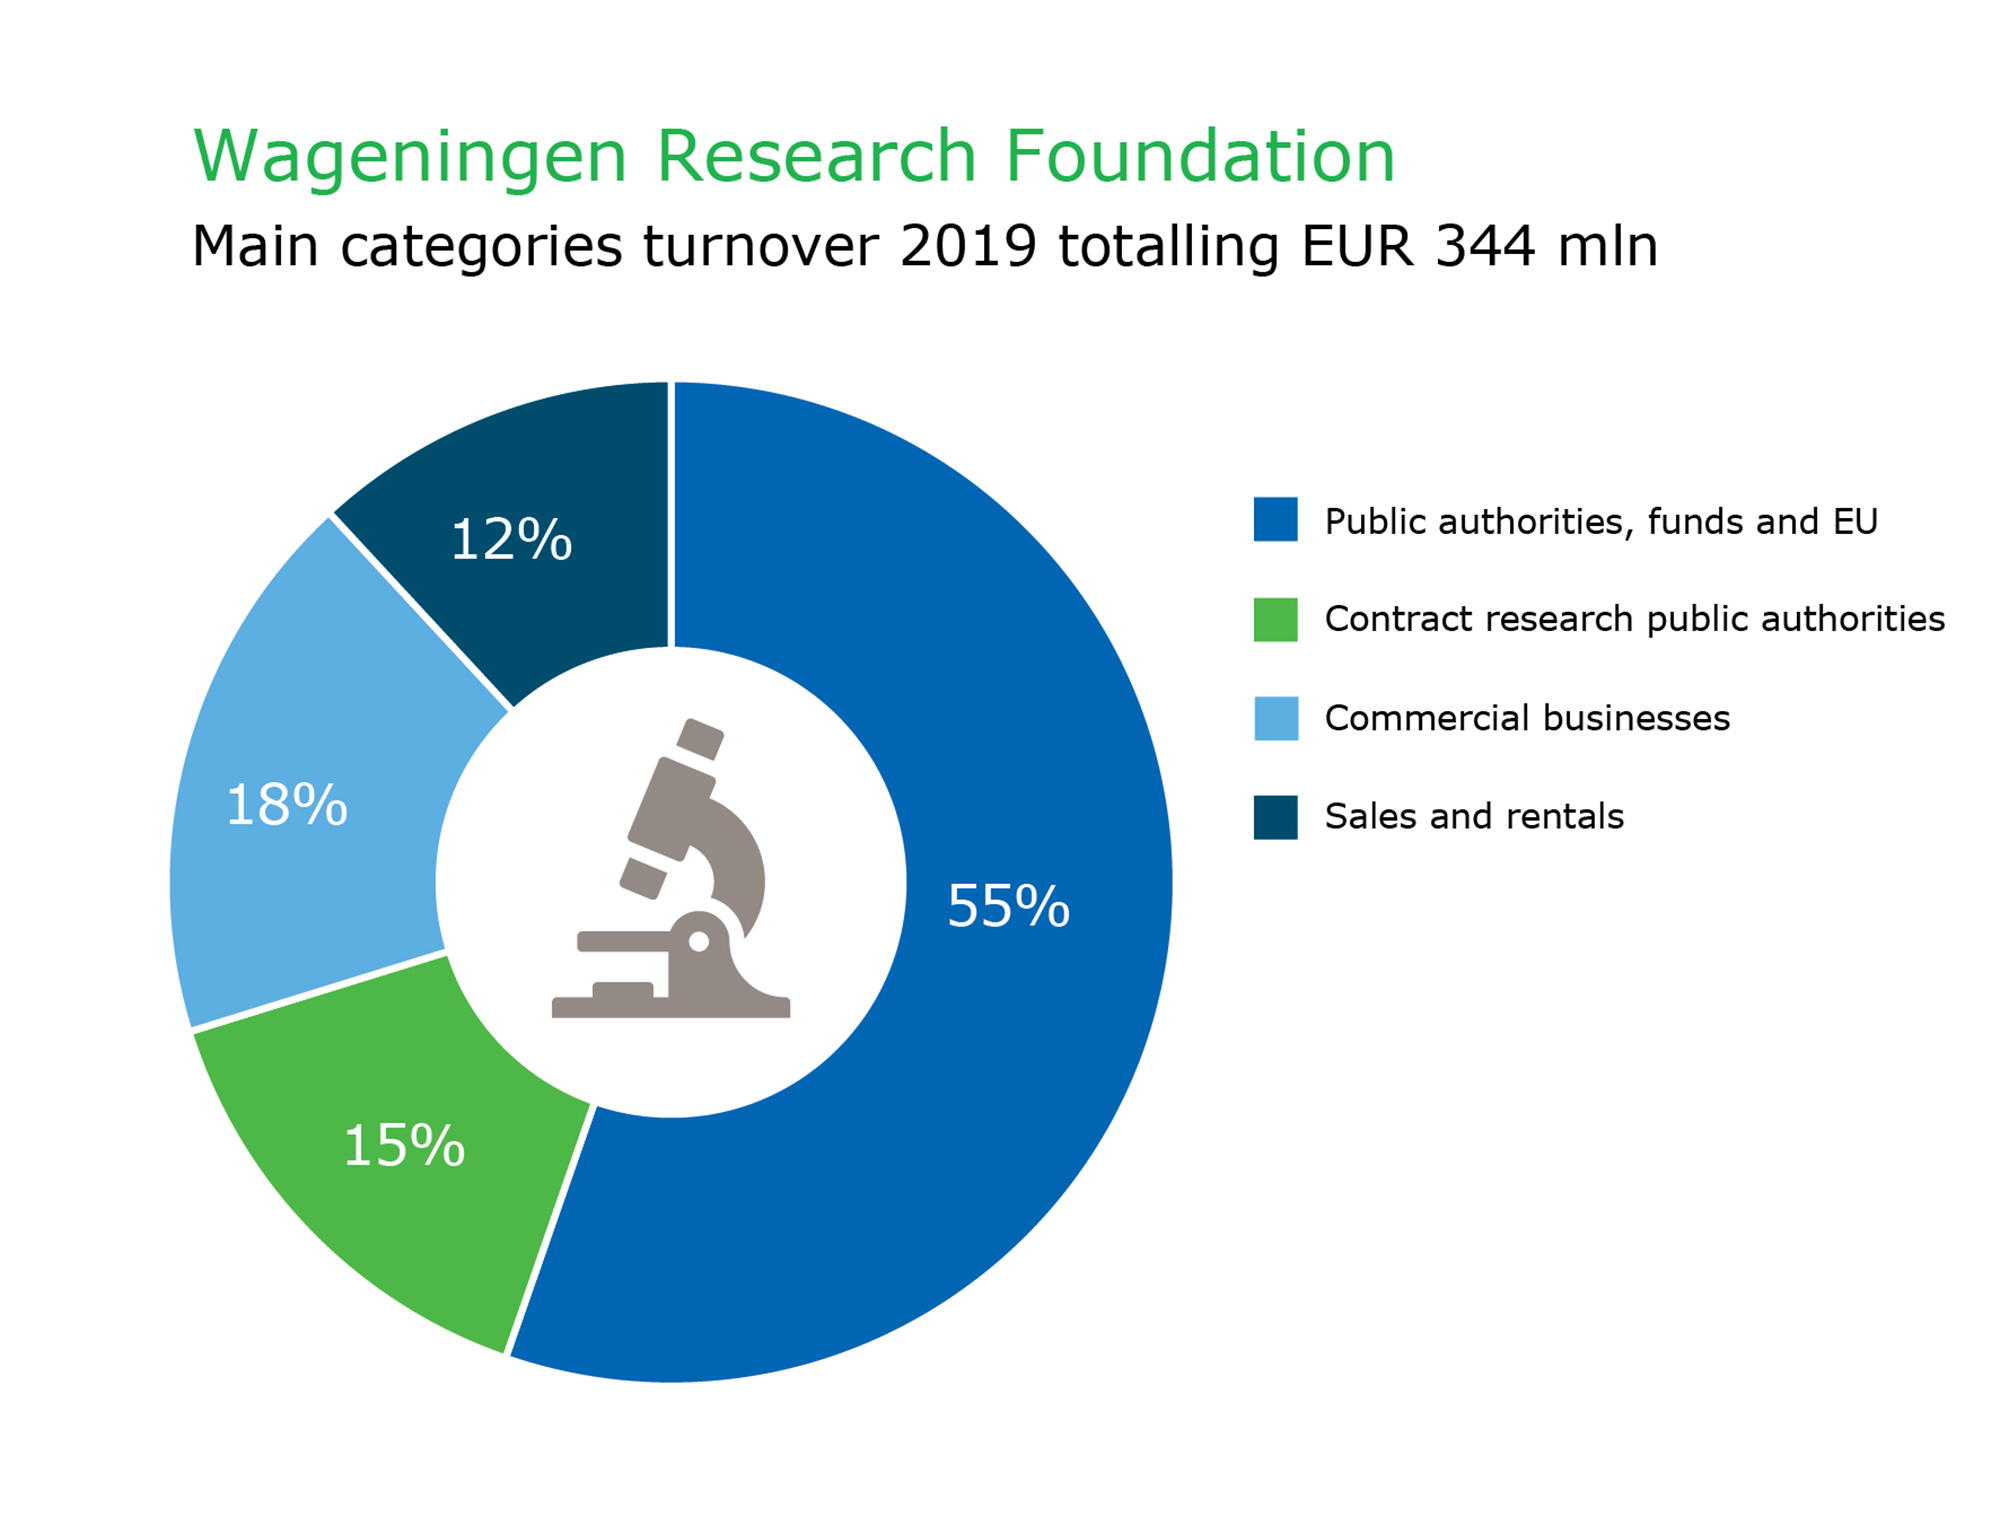 Wageningen reserach Foundation, main category turnover 2019 totalling EUR 344 million